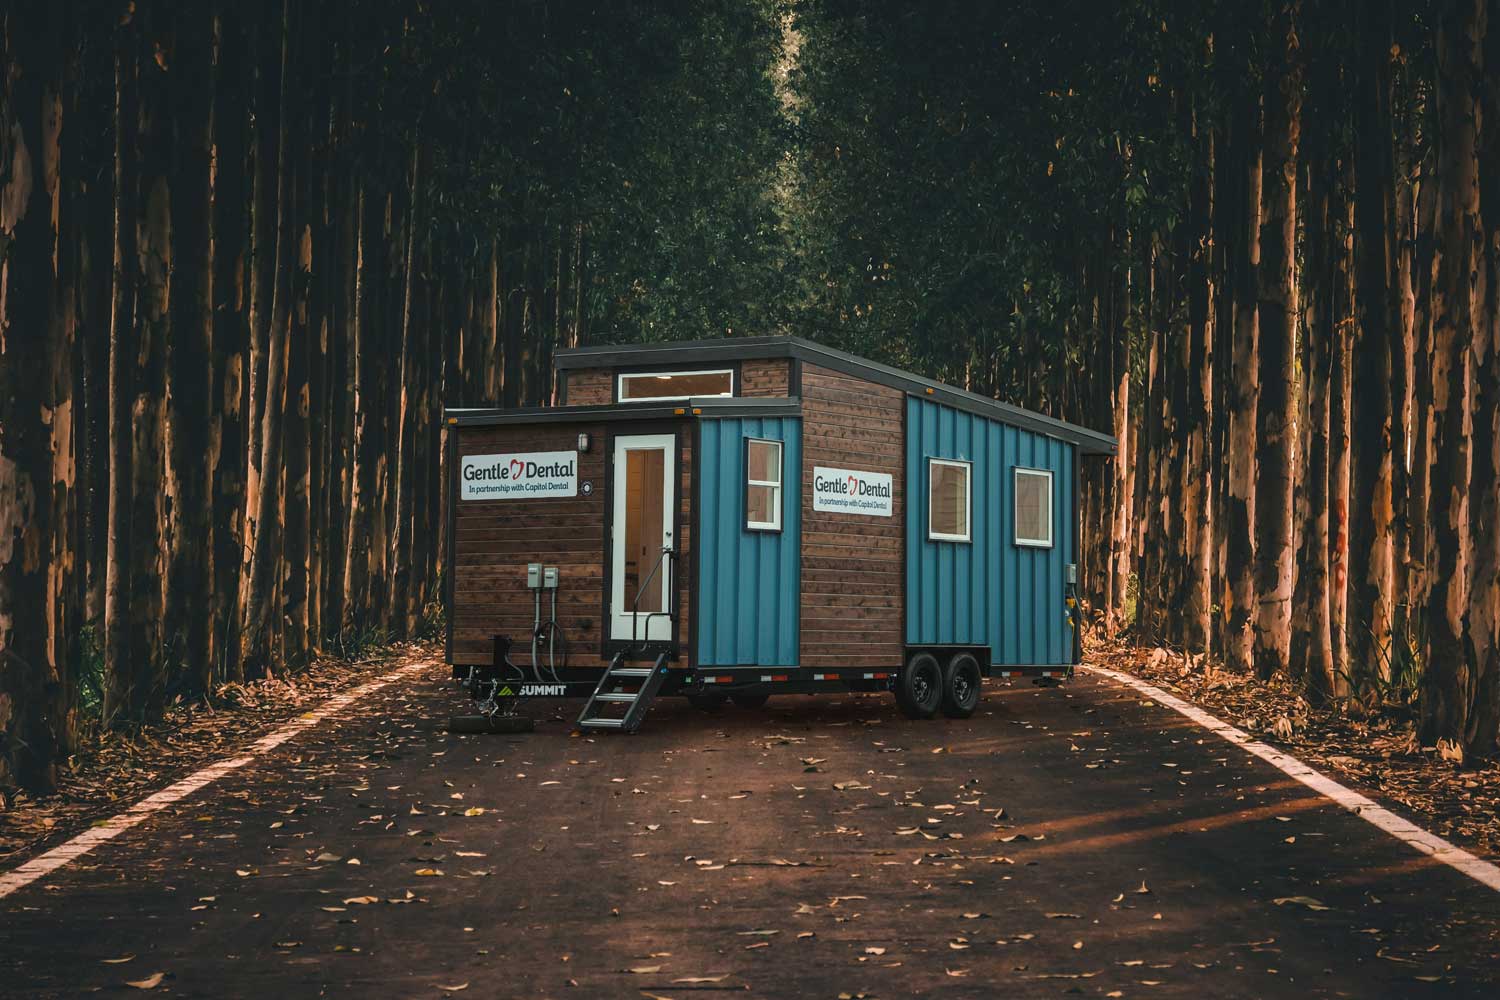 Exterior of the Gentle Dental Mobile Dentists office commercial tiny home, set on a forested road